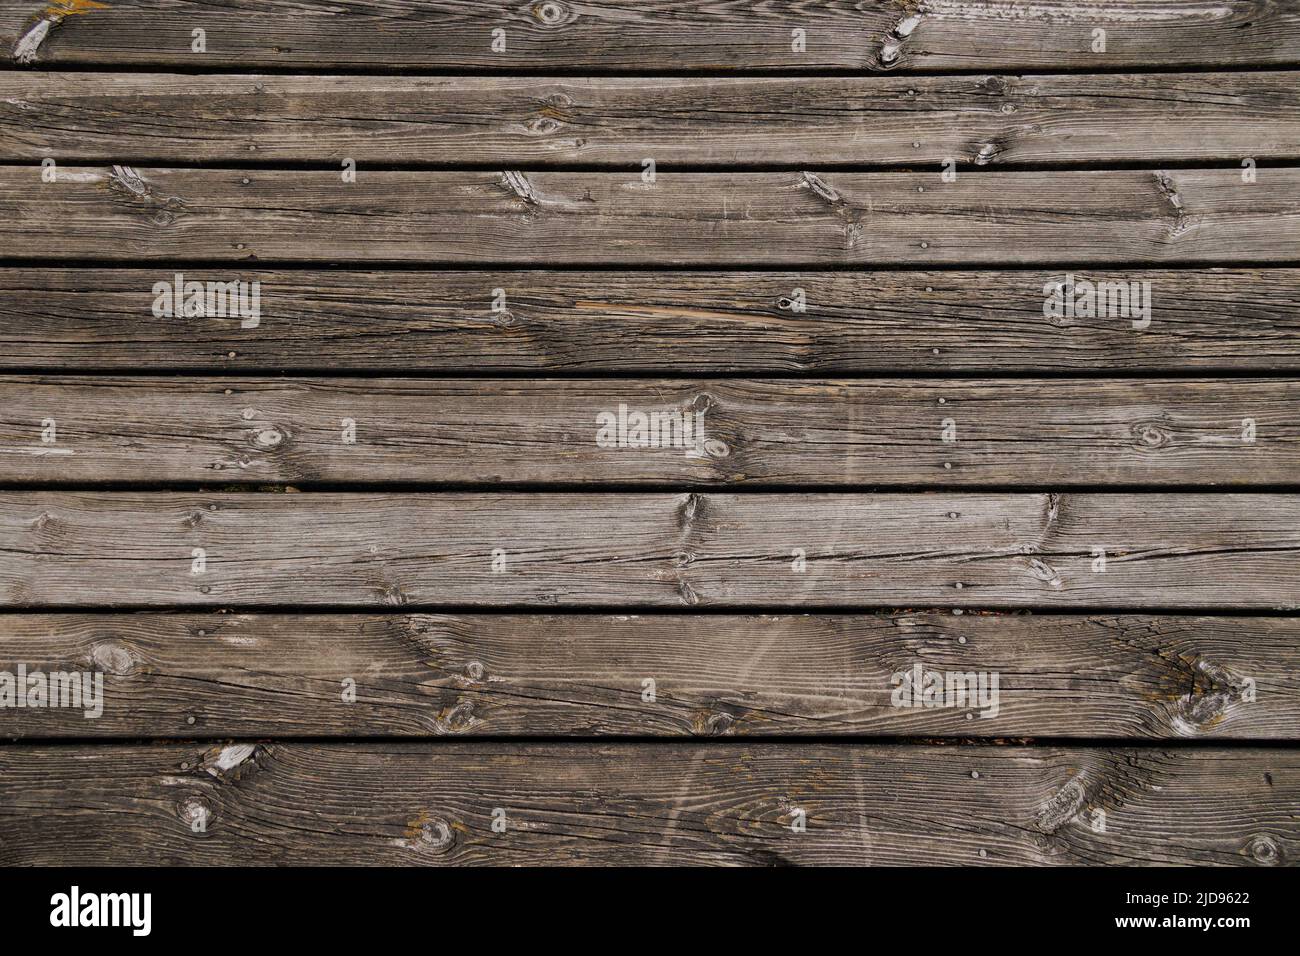 Old wooden planks of a pier in horizontal orientation Stock Photo